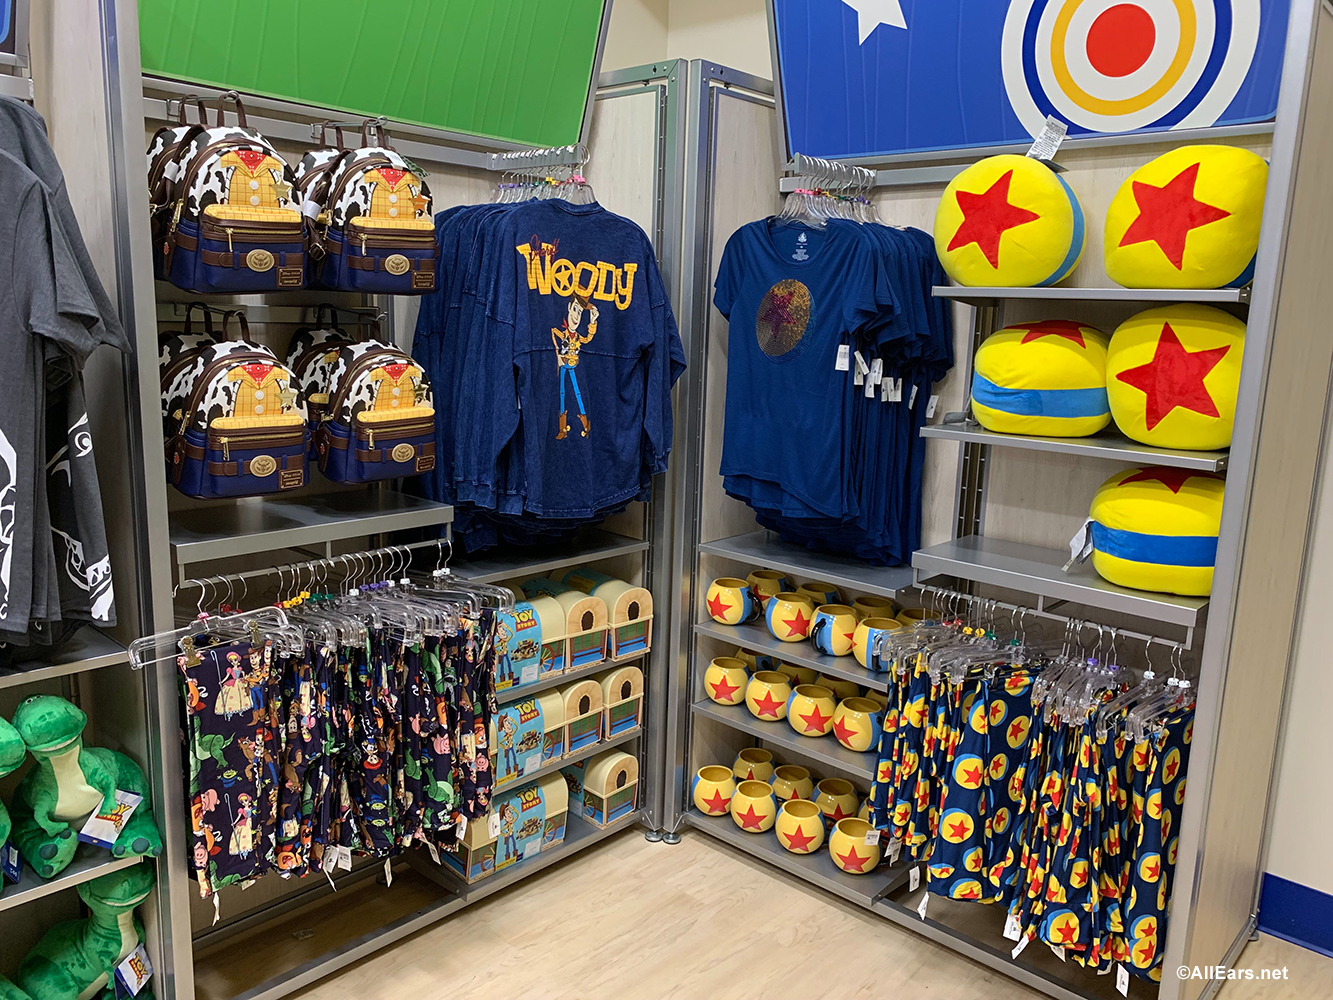 New Pop-Up Shop in Hollywood Studios' Toy Story Land - AllEars.Net